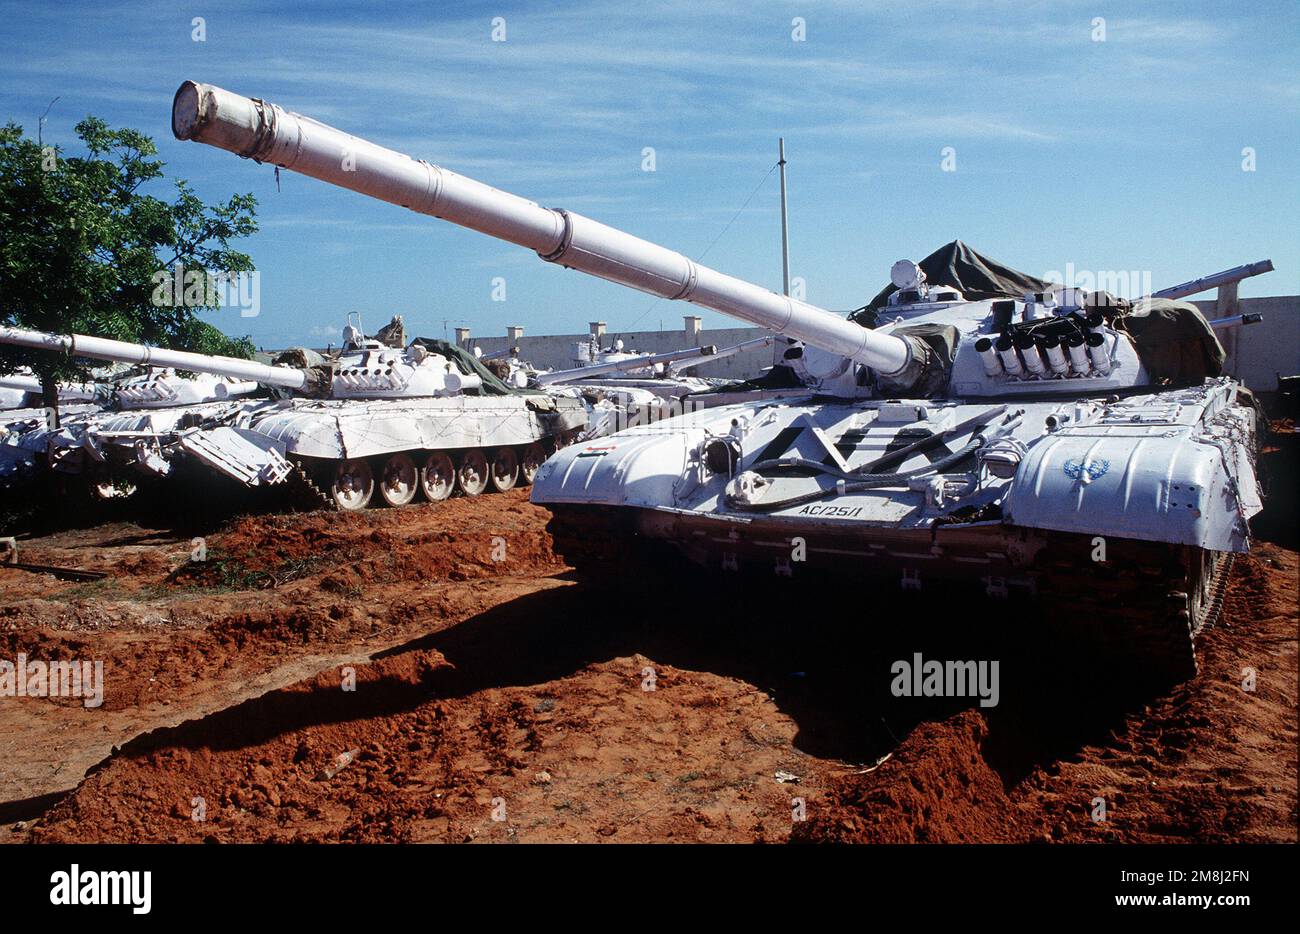 United Nations tanks at the Belgian compound in Kismayo. The UN forces are in Somalia in support of Operation CONTINUE HOPE. Front view of a T-72 main battle tank with UN markings. Subject Operation/Series: CONTINUE HOPE Base: Kismayo Country: Somalia (SOM) Stock Photo